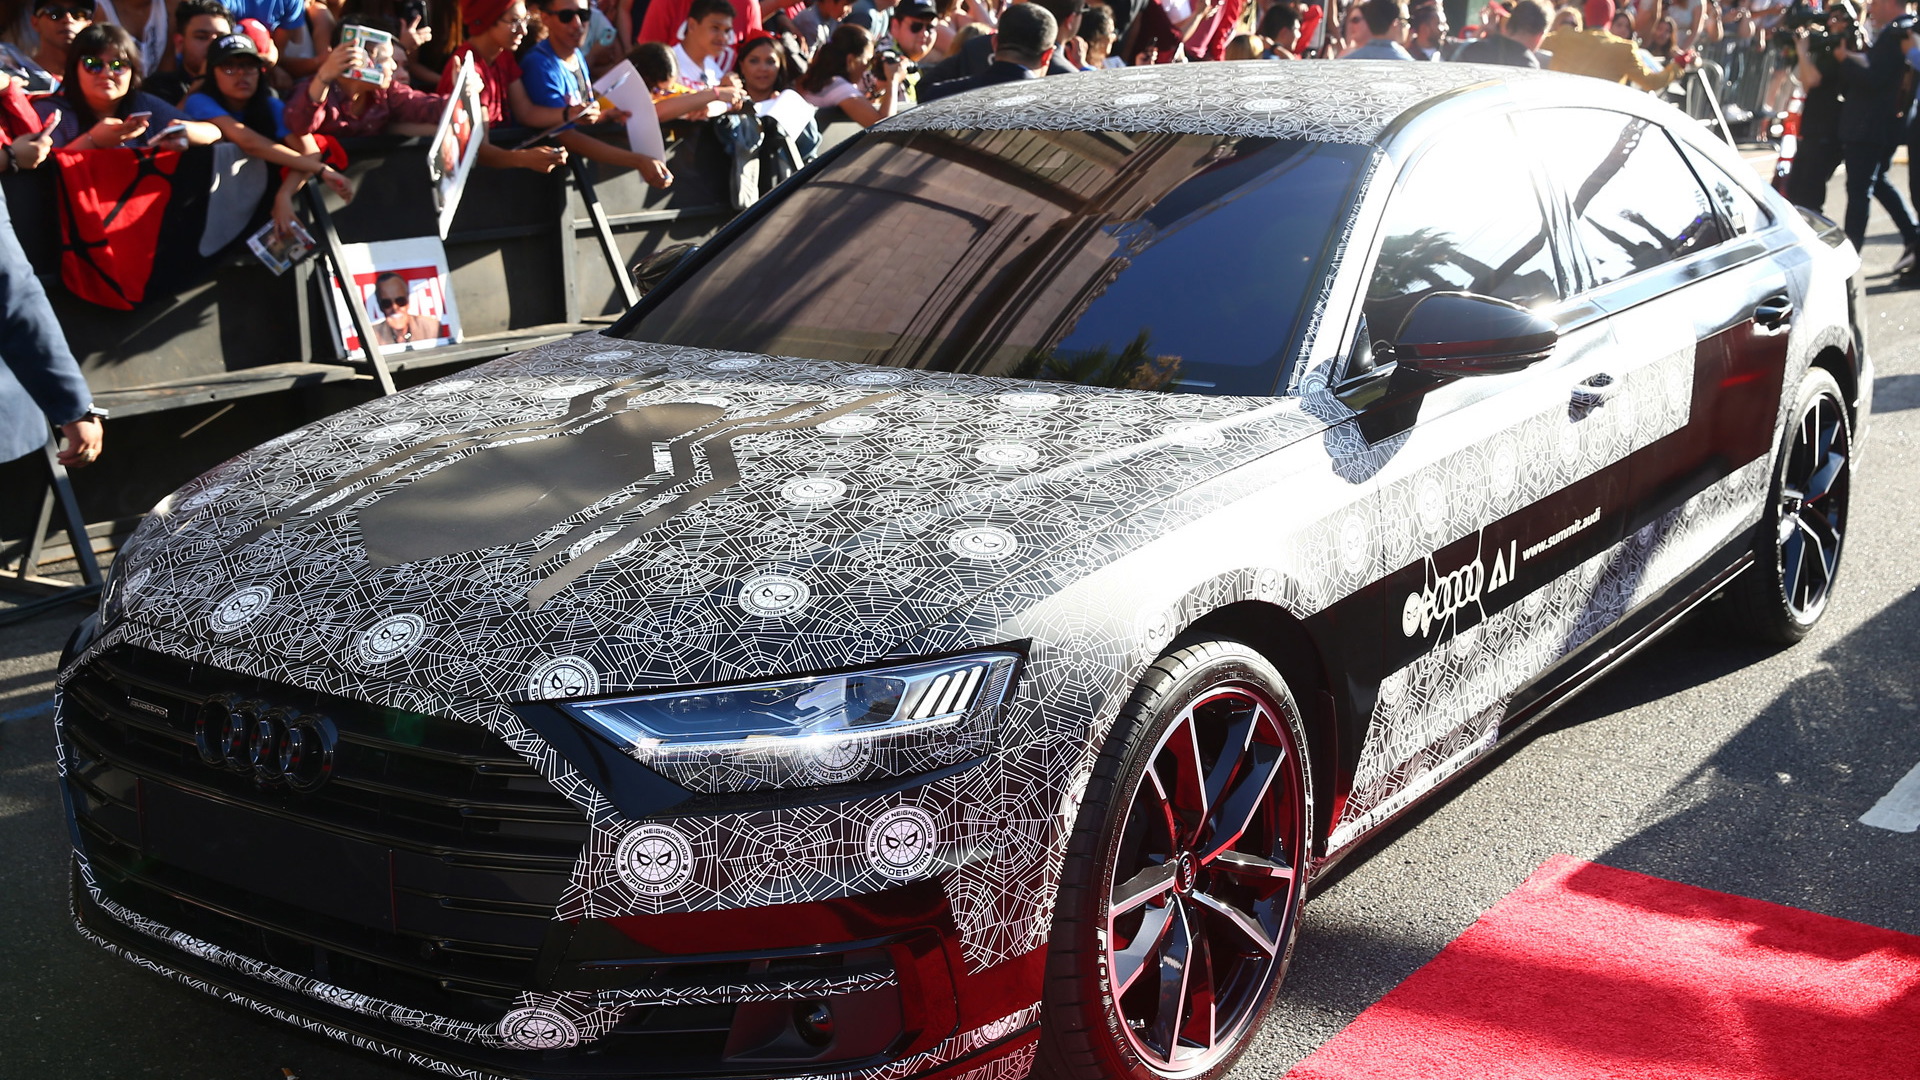 2019 Audi A8 at the “Spider-Man: Homecoming” premiere